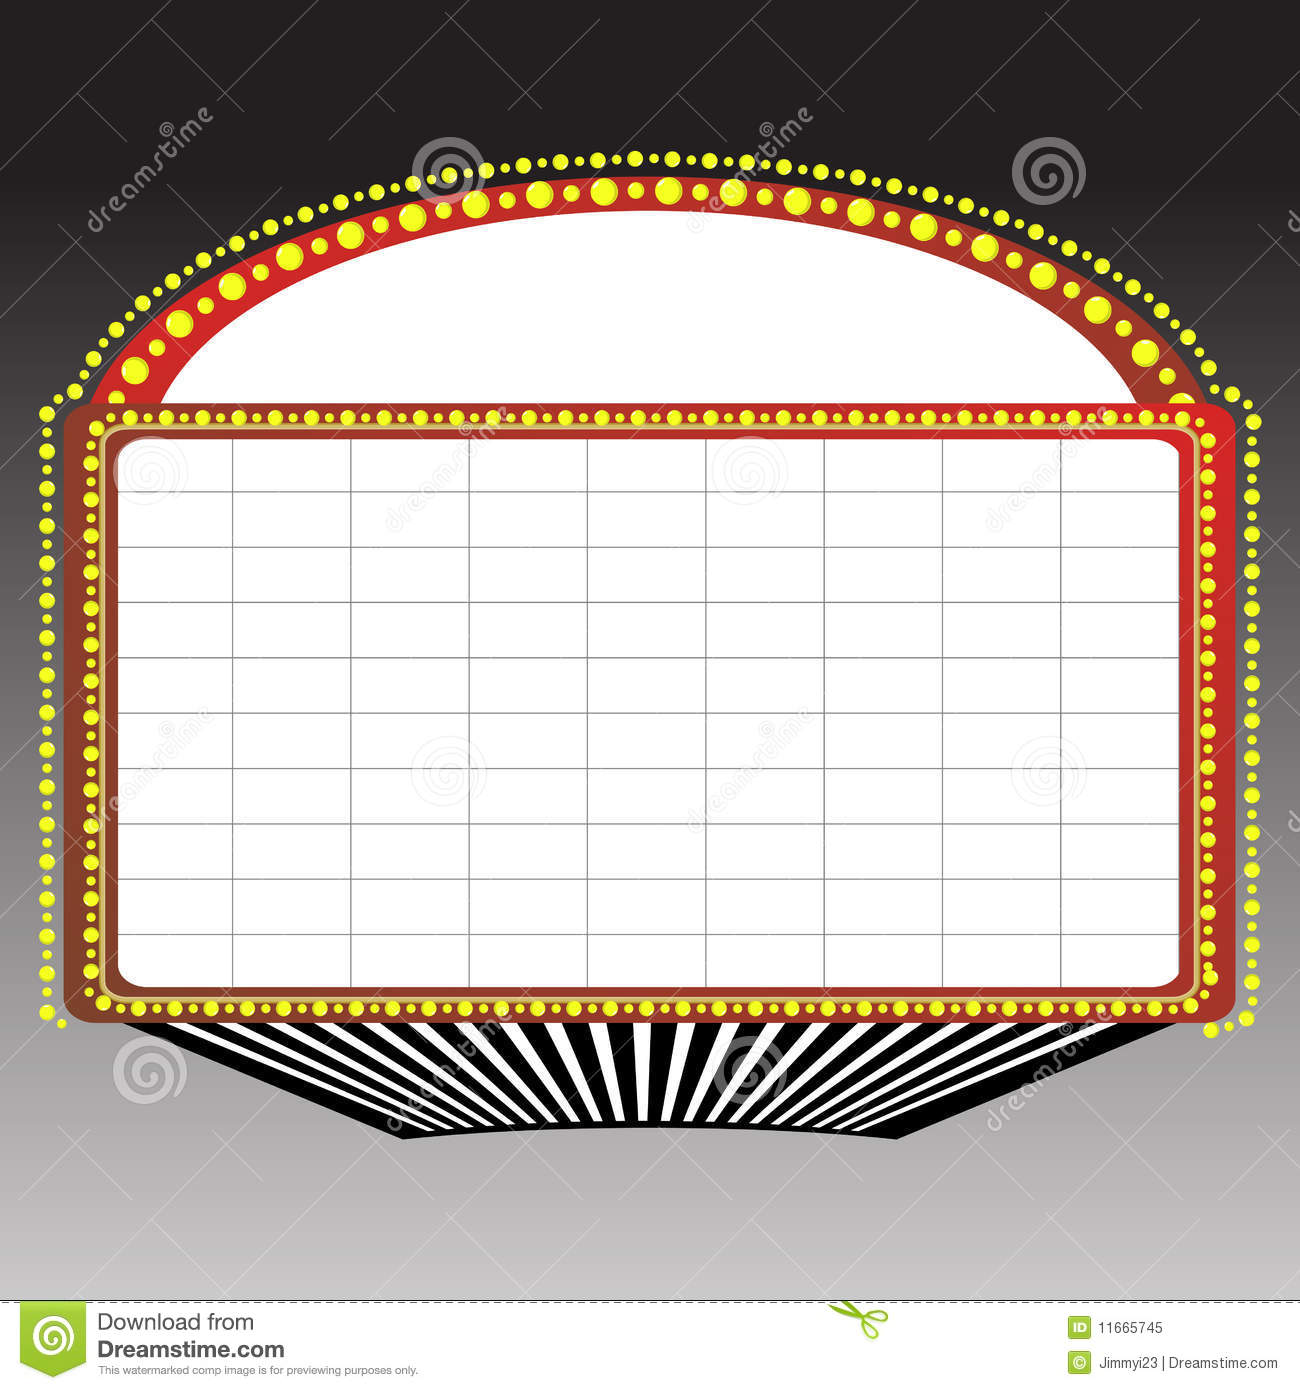 451 Marquee free clipart.